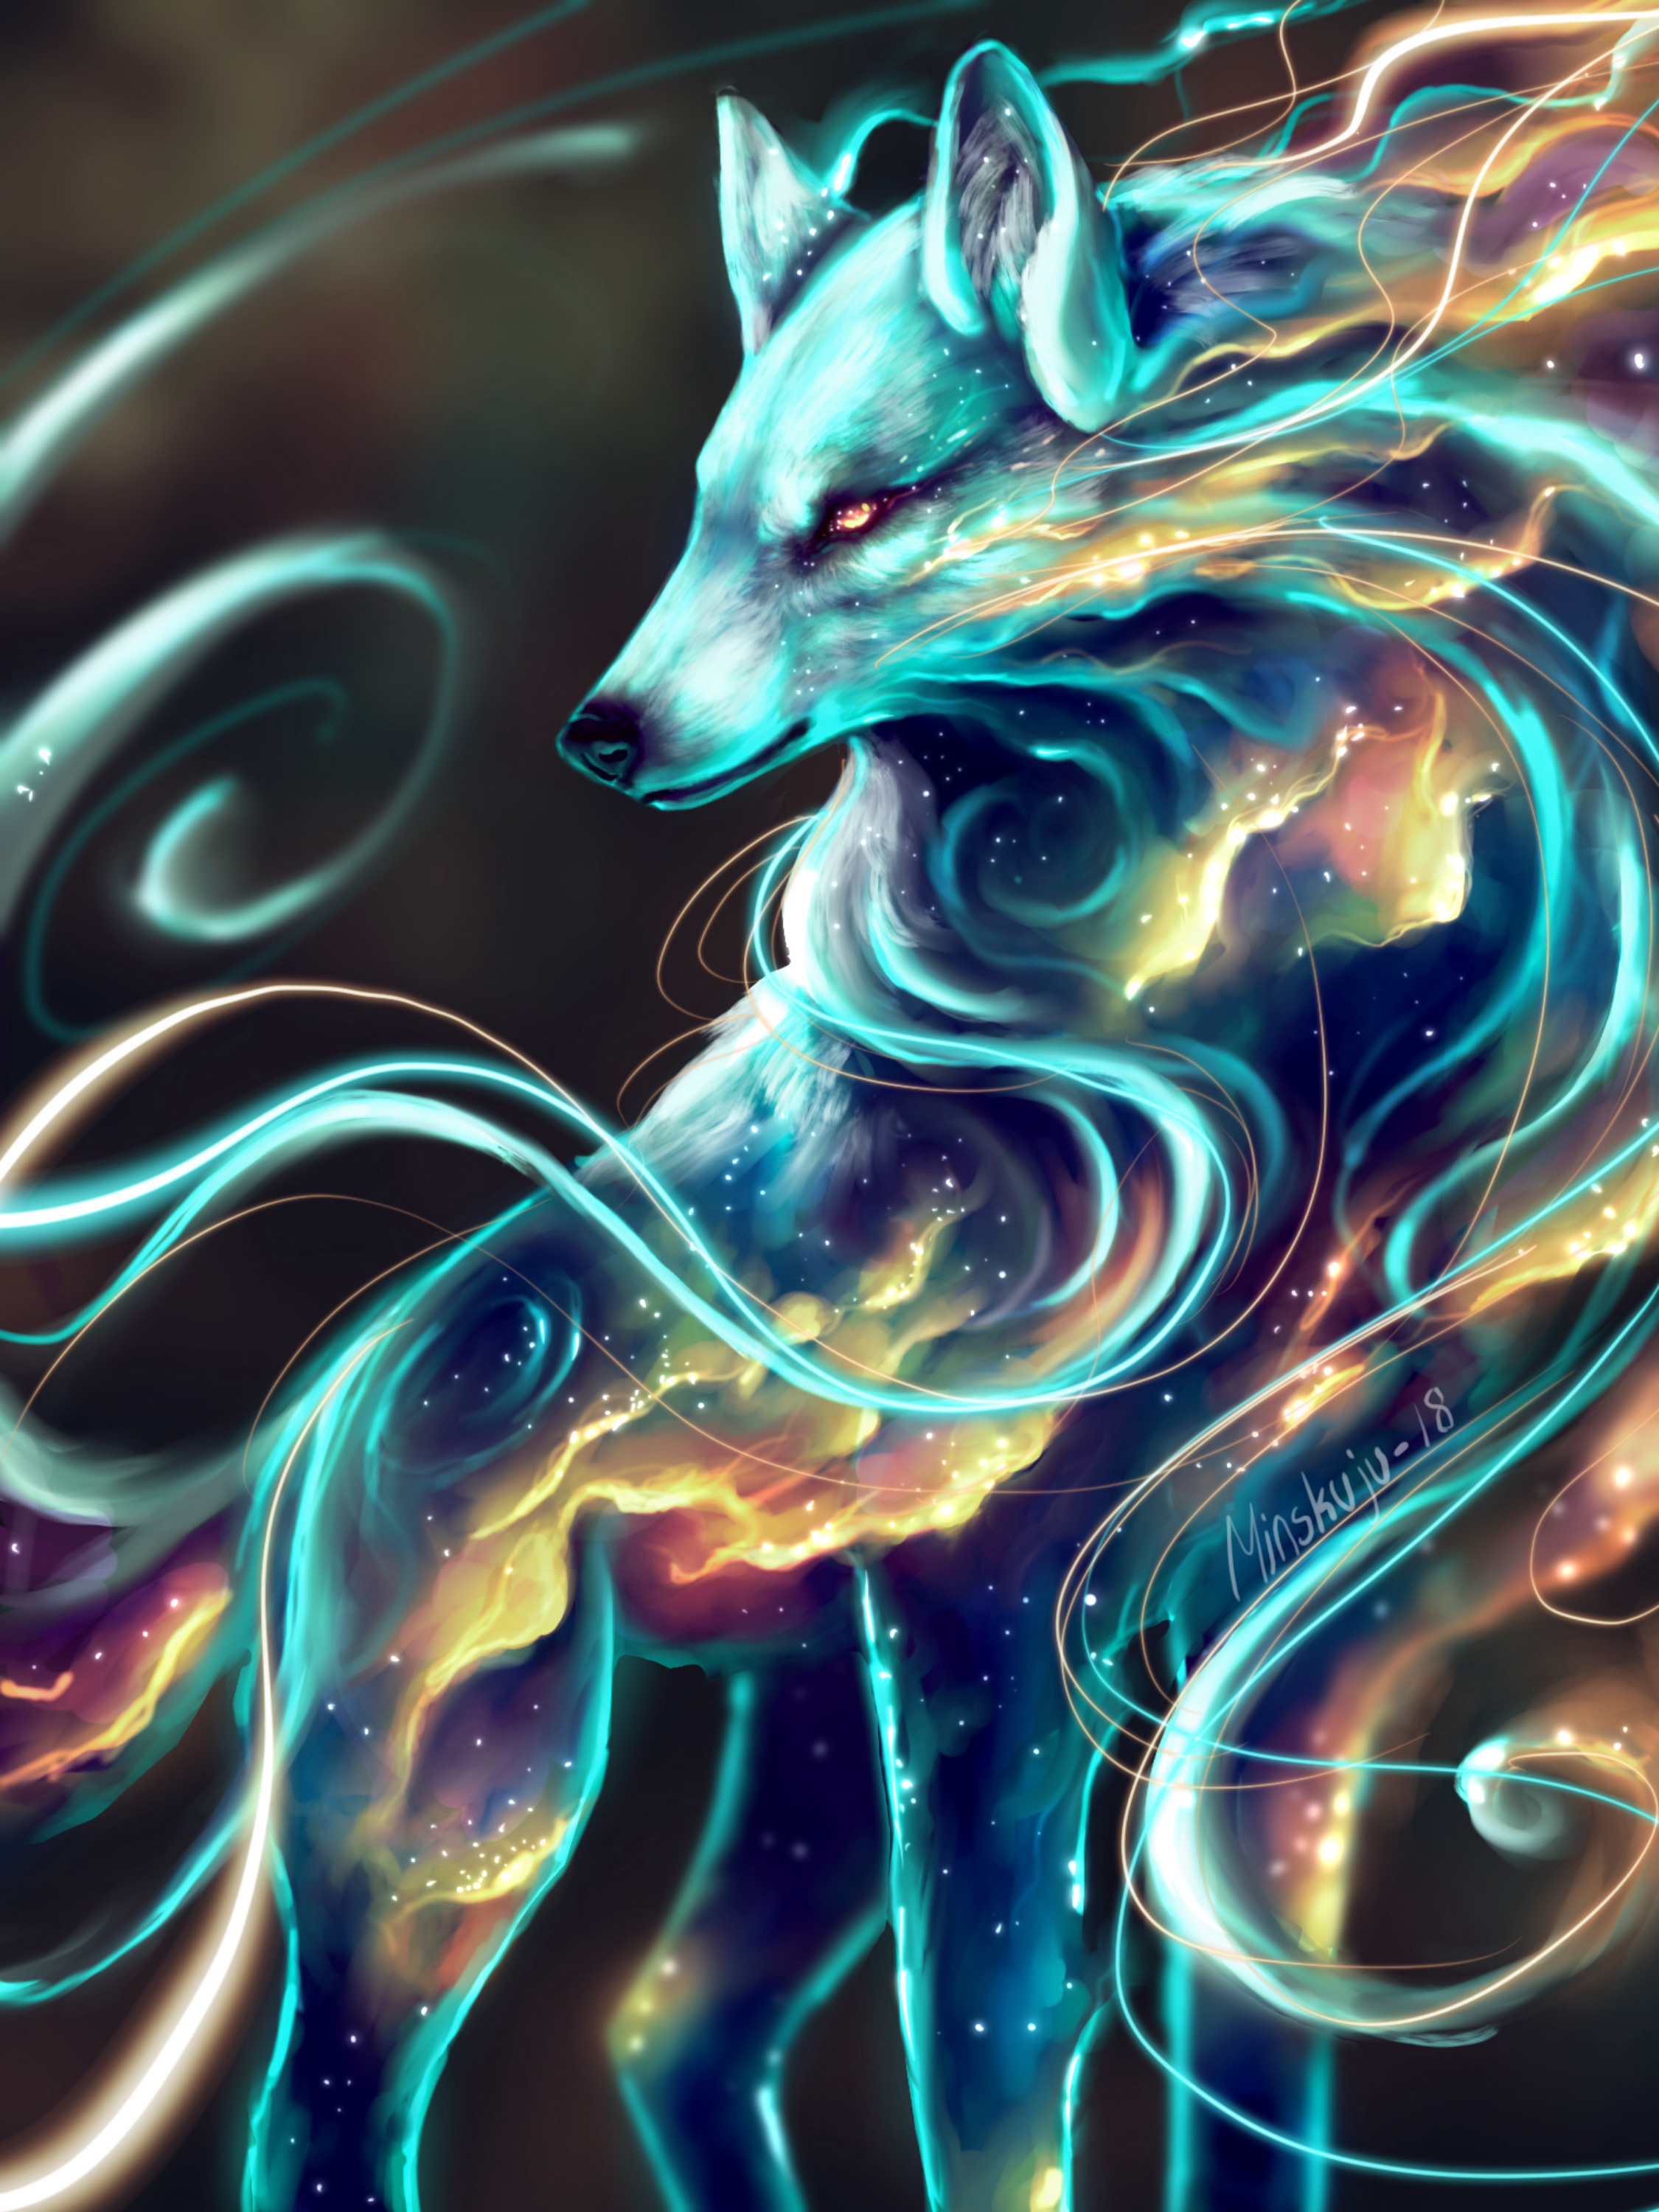 50837 download wallpaper art, wolf, space, being, creature, fantastic, cosmic screensavers and pictures for free